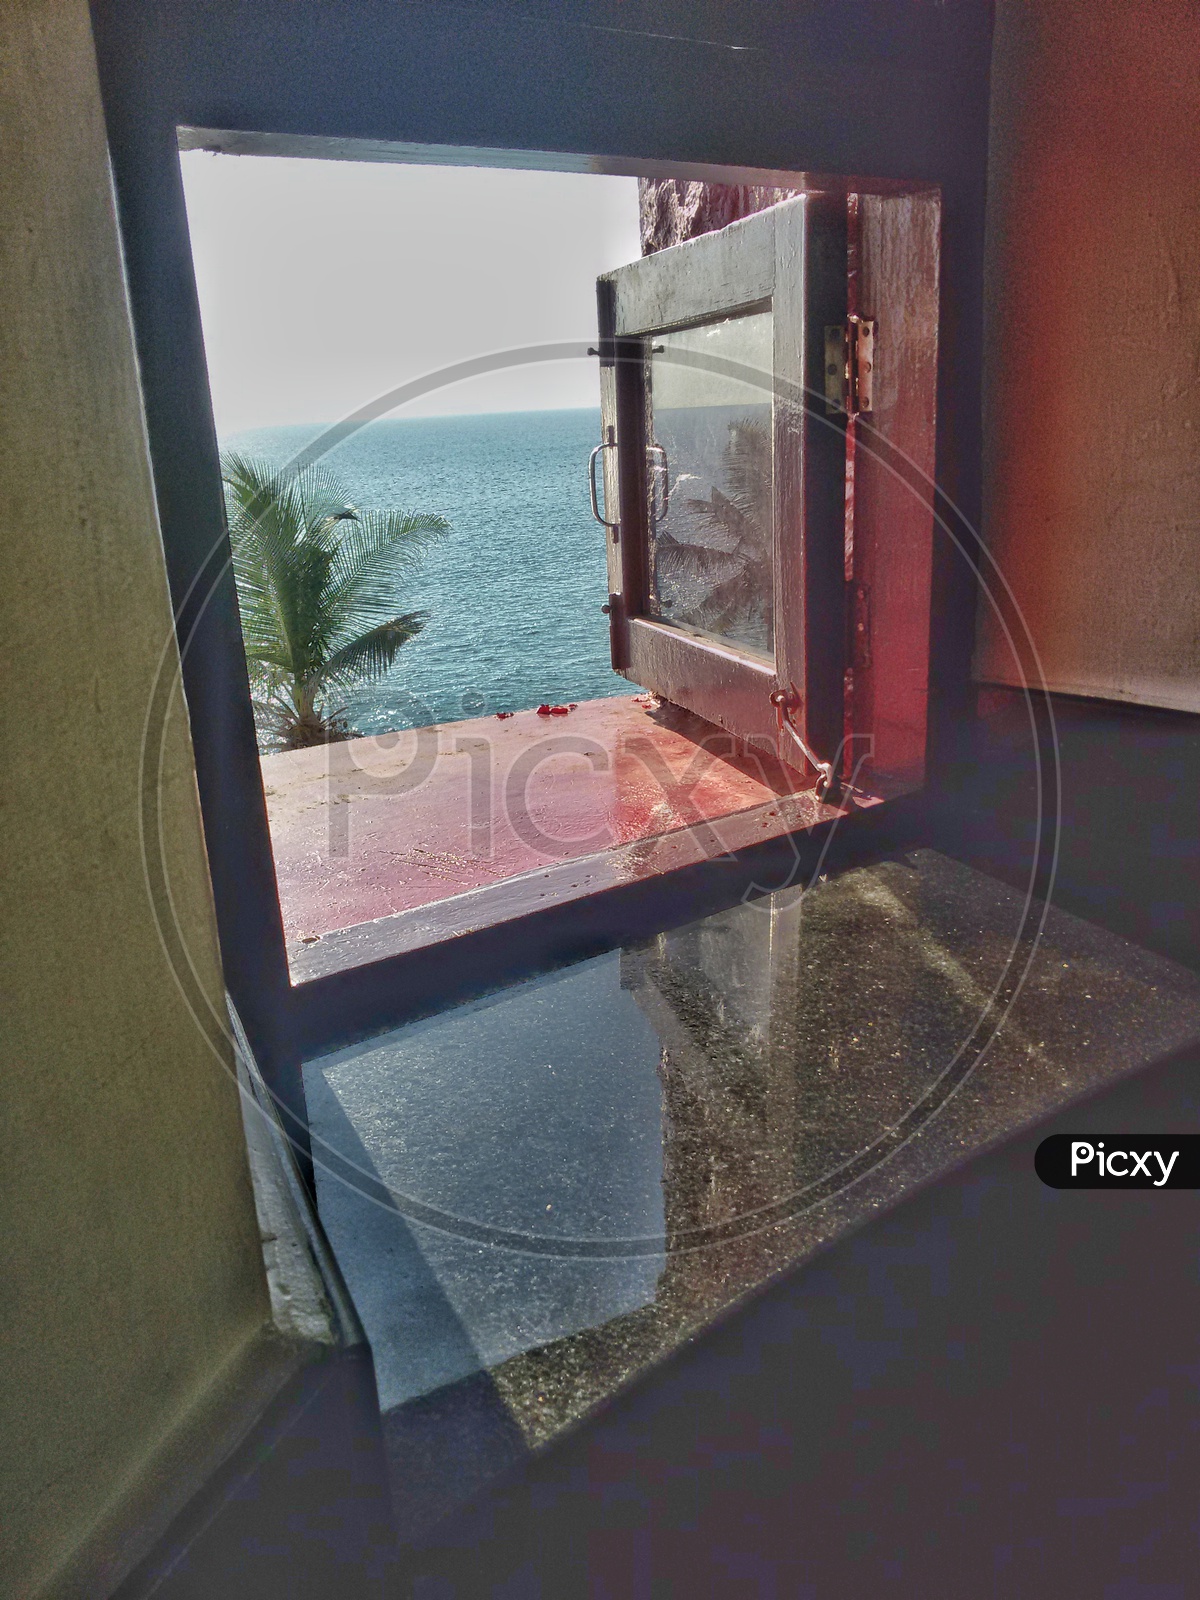 A window through which we can see the beach